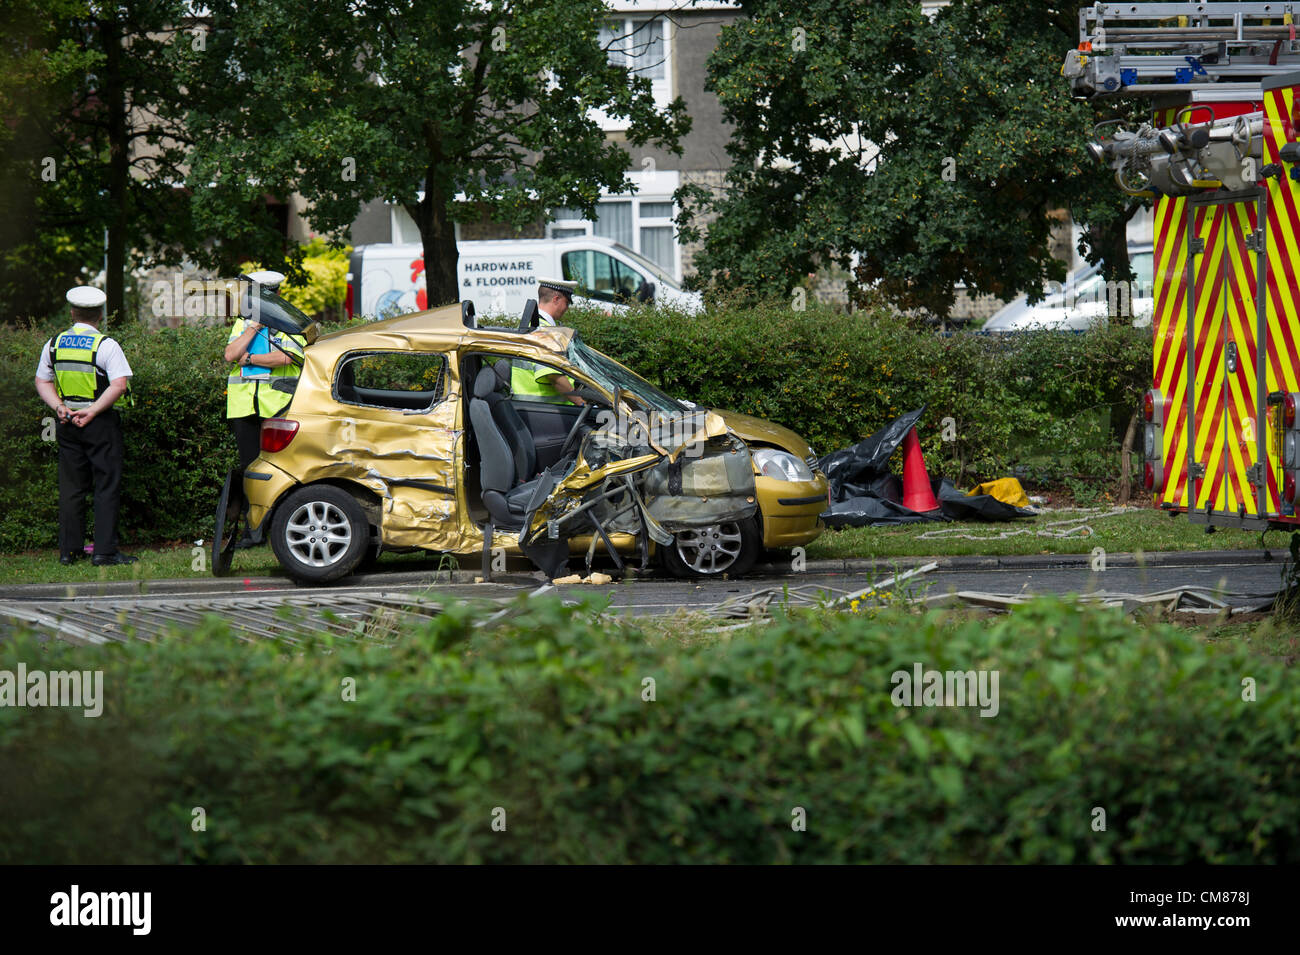 ARCHIVE IMAGES: Chelmsford, Essex, UK. An inquest has held today (26/10/2012) into the fatal road traffic collision between a Toyota Yaris and a fire engine at Basildon in September 2011. The collision occurred on the 9th September 2011 when the fire engine was en-route to an emergency call. The driver of the Toyota, mother of three, Martha Gakonde, died at the scene. The inquest concluded accidental death. Stock Photo